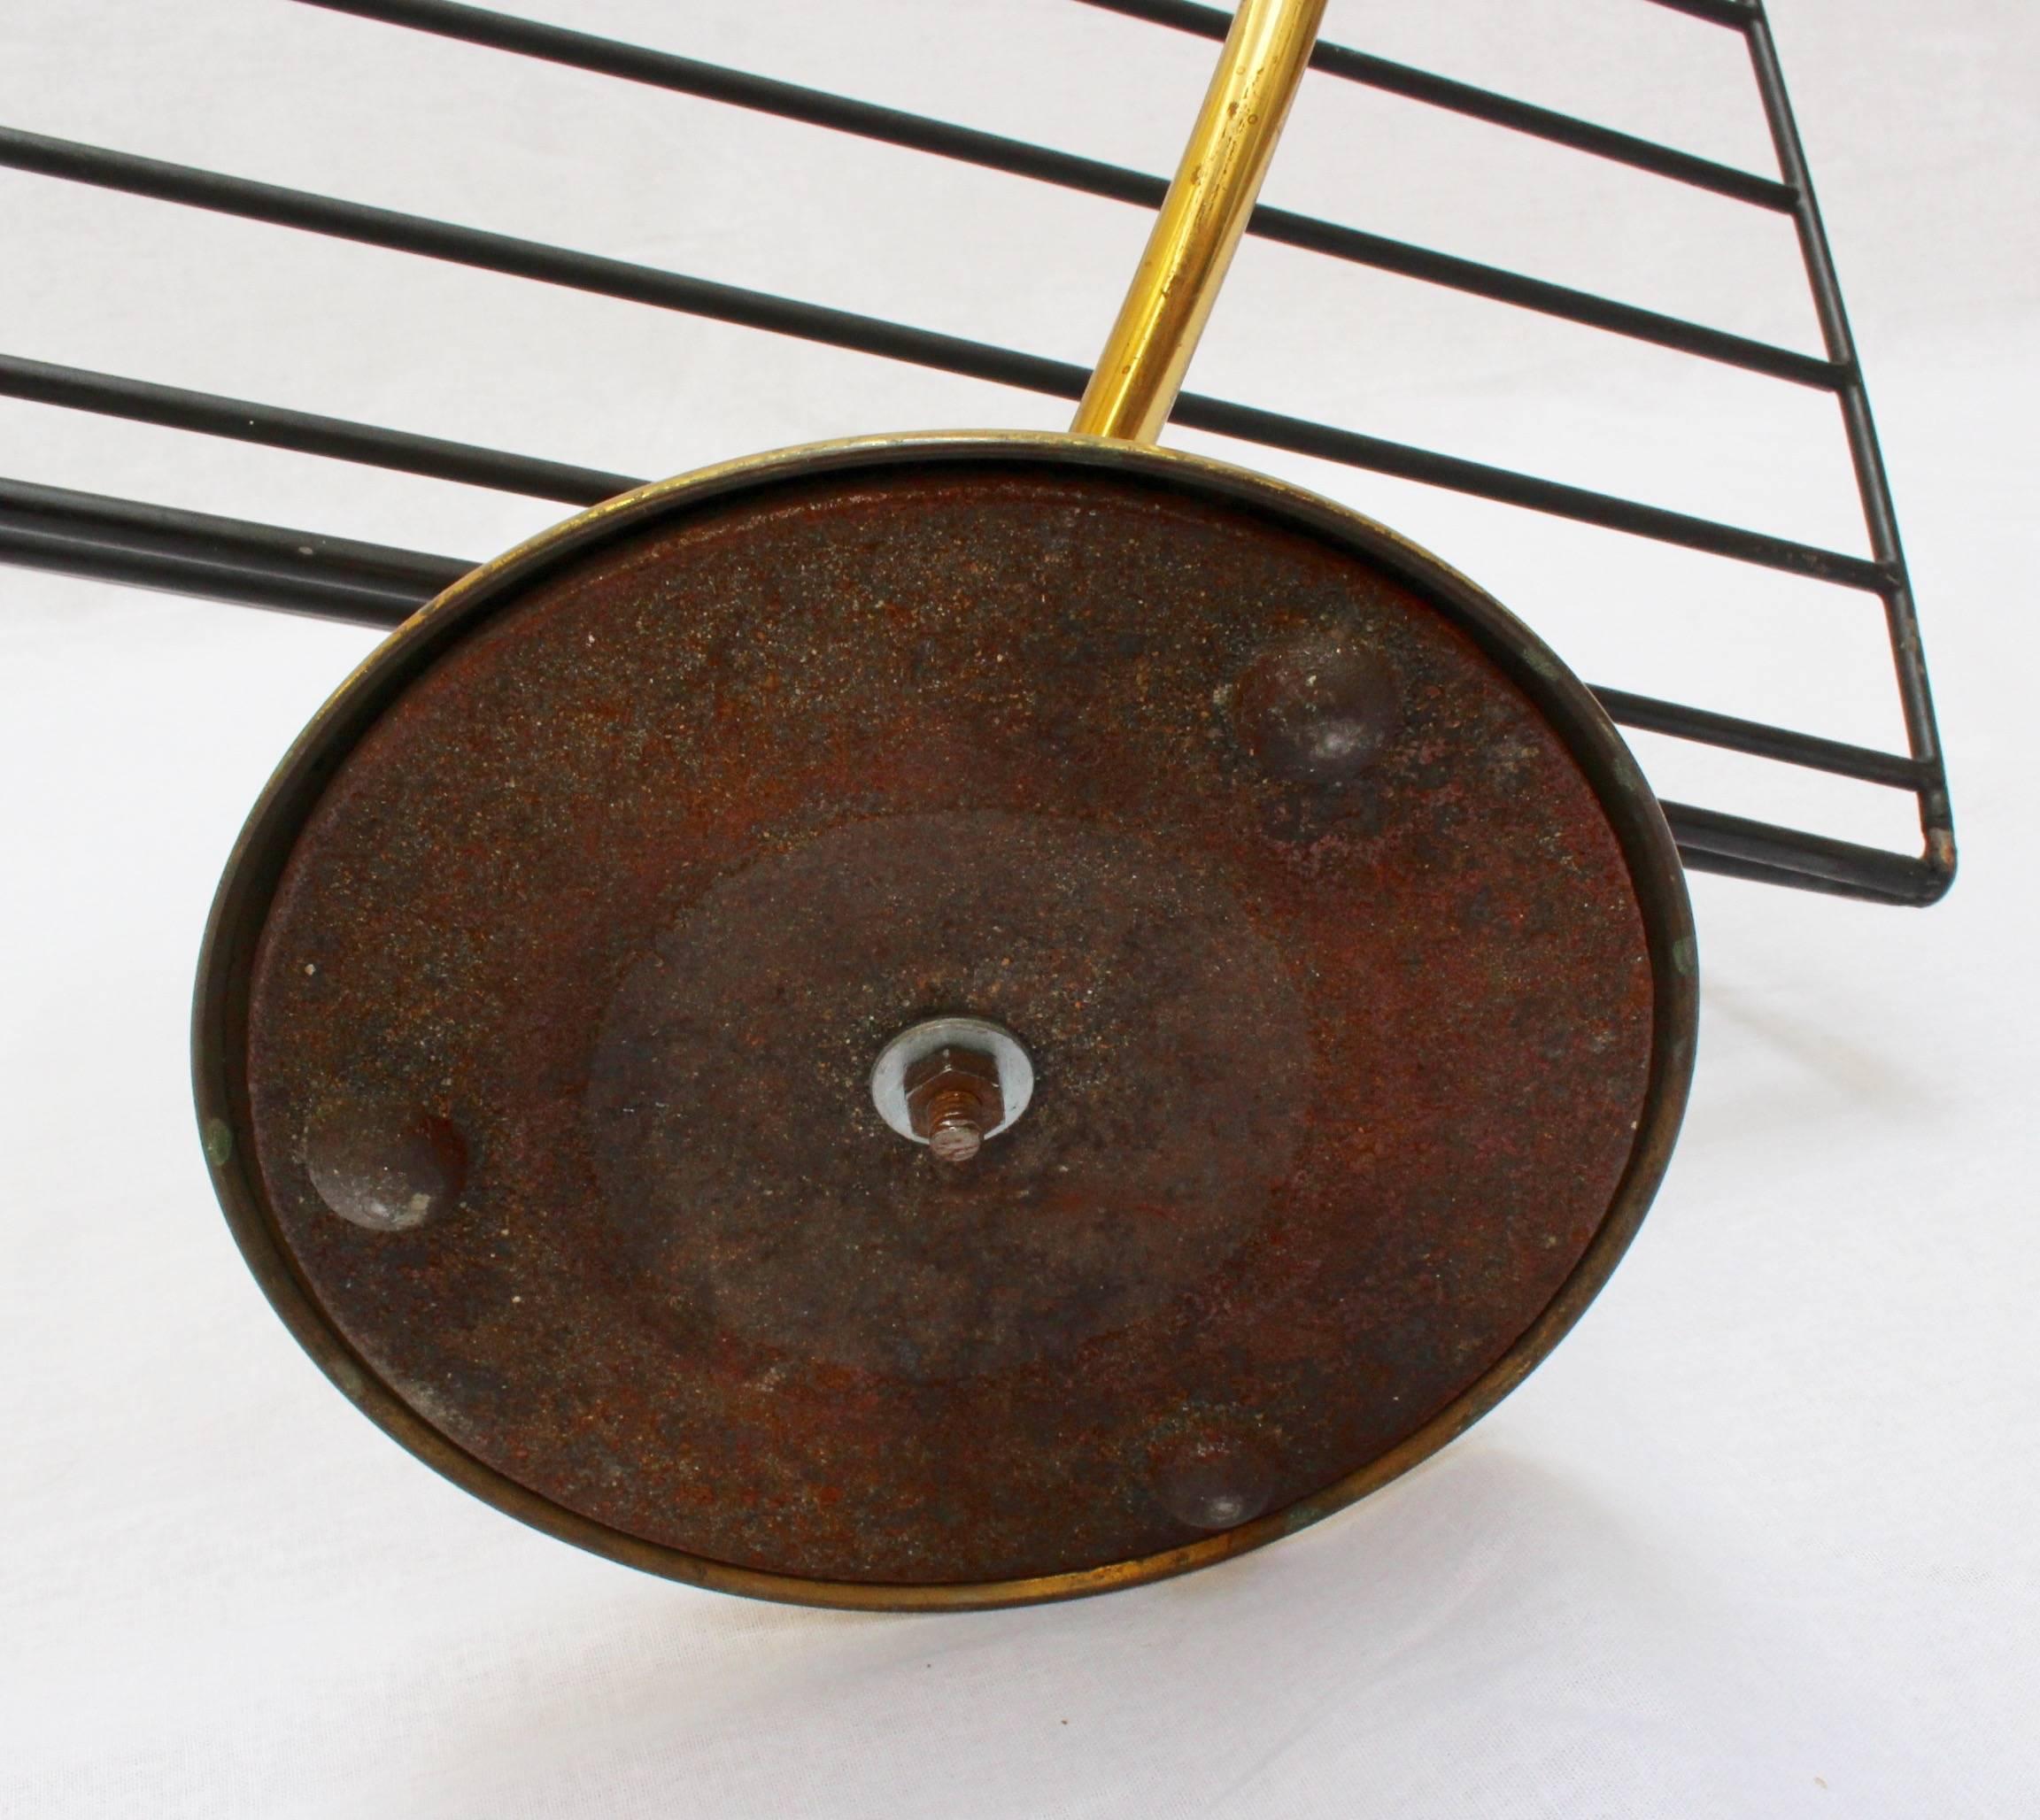 Music Note-Shaped Italian Brass Magazine Stand (c. 1950s) For Sale 6